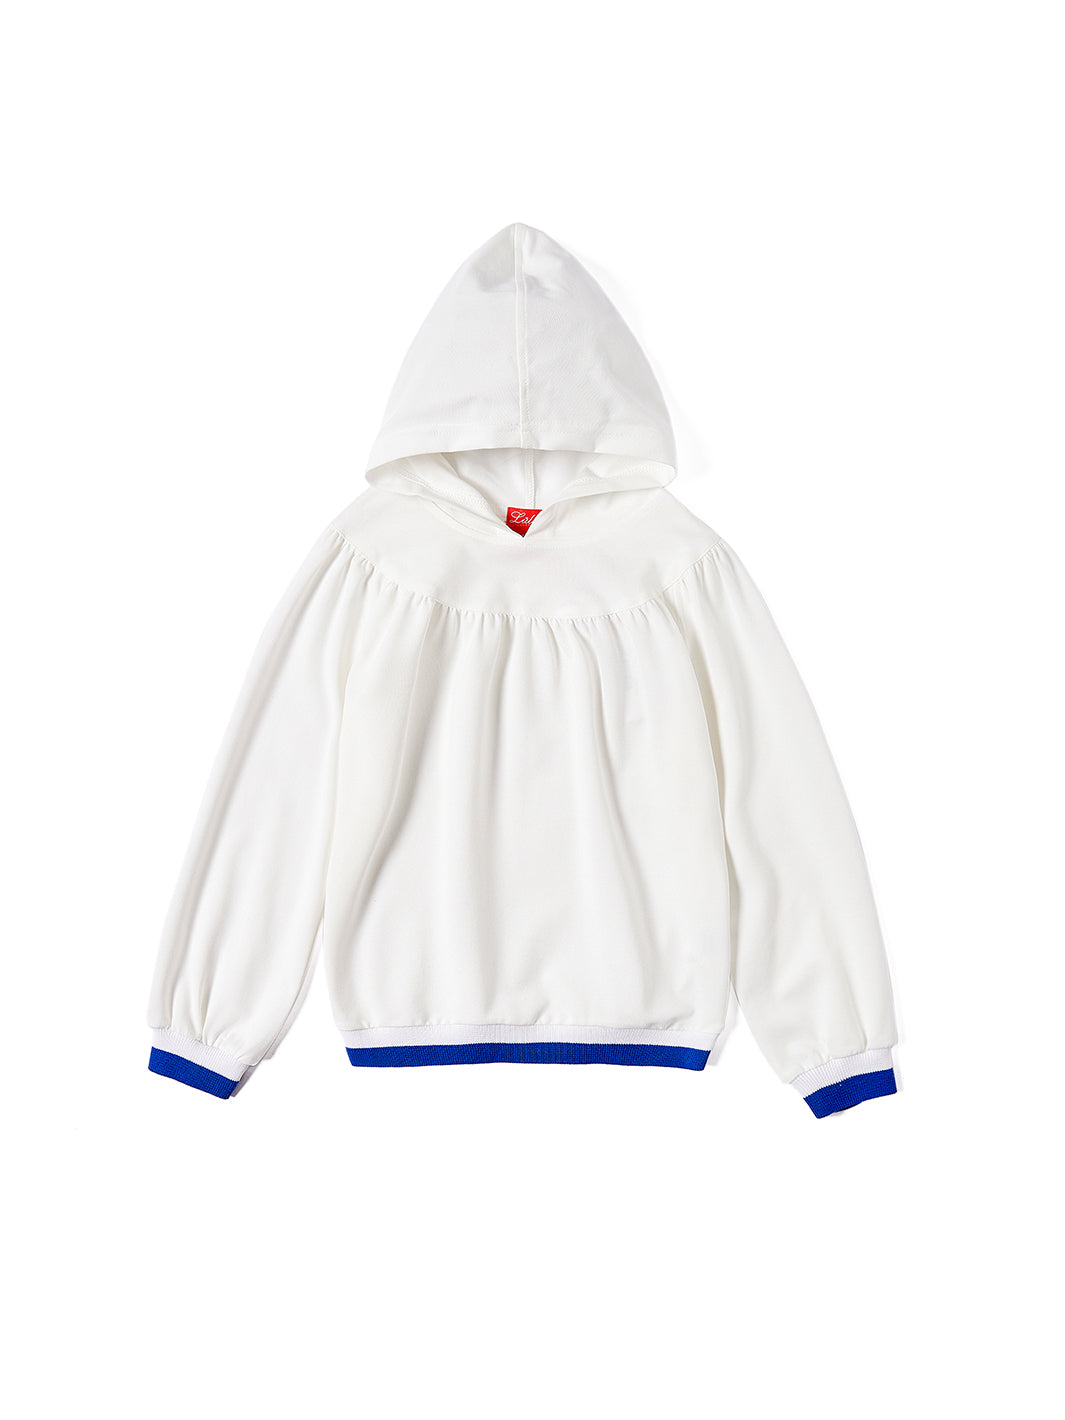 Rib Combo Hooded Gathered Top -White